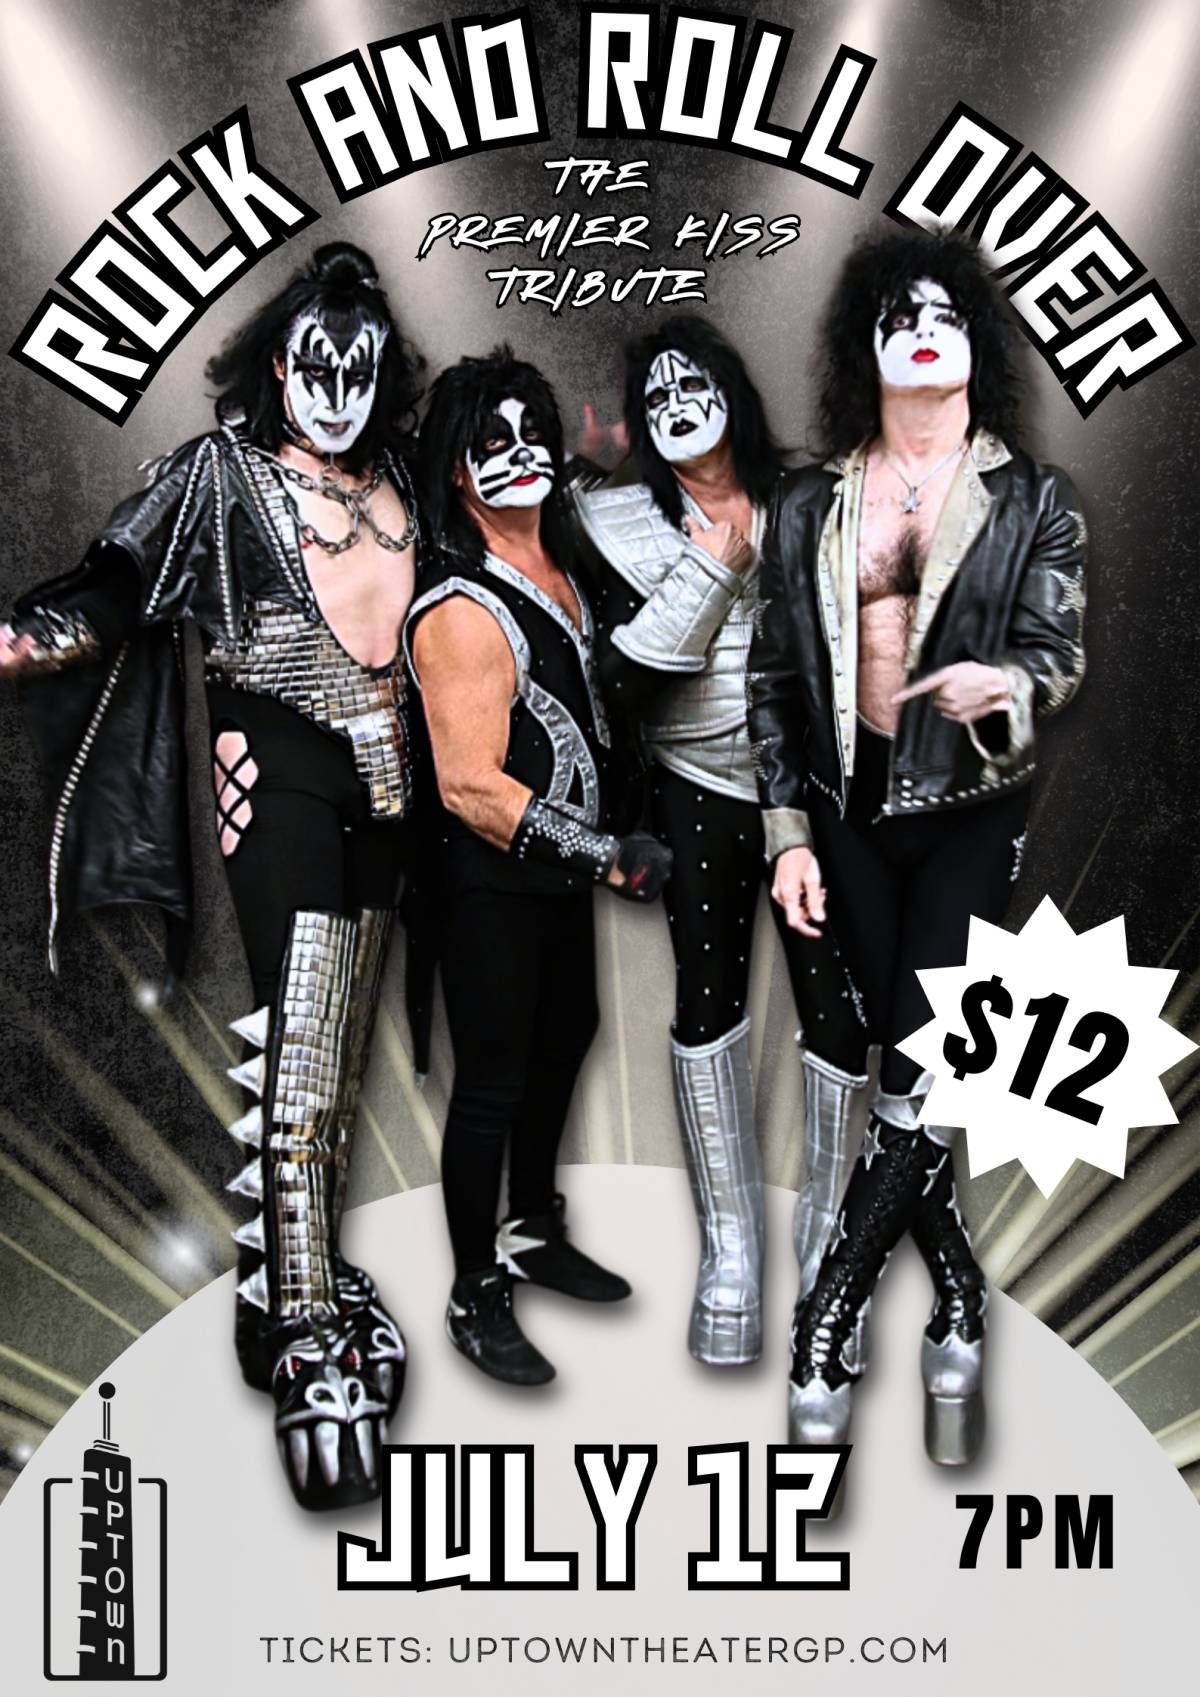 Rock and Roll Over, The Premier KISS Tribute